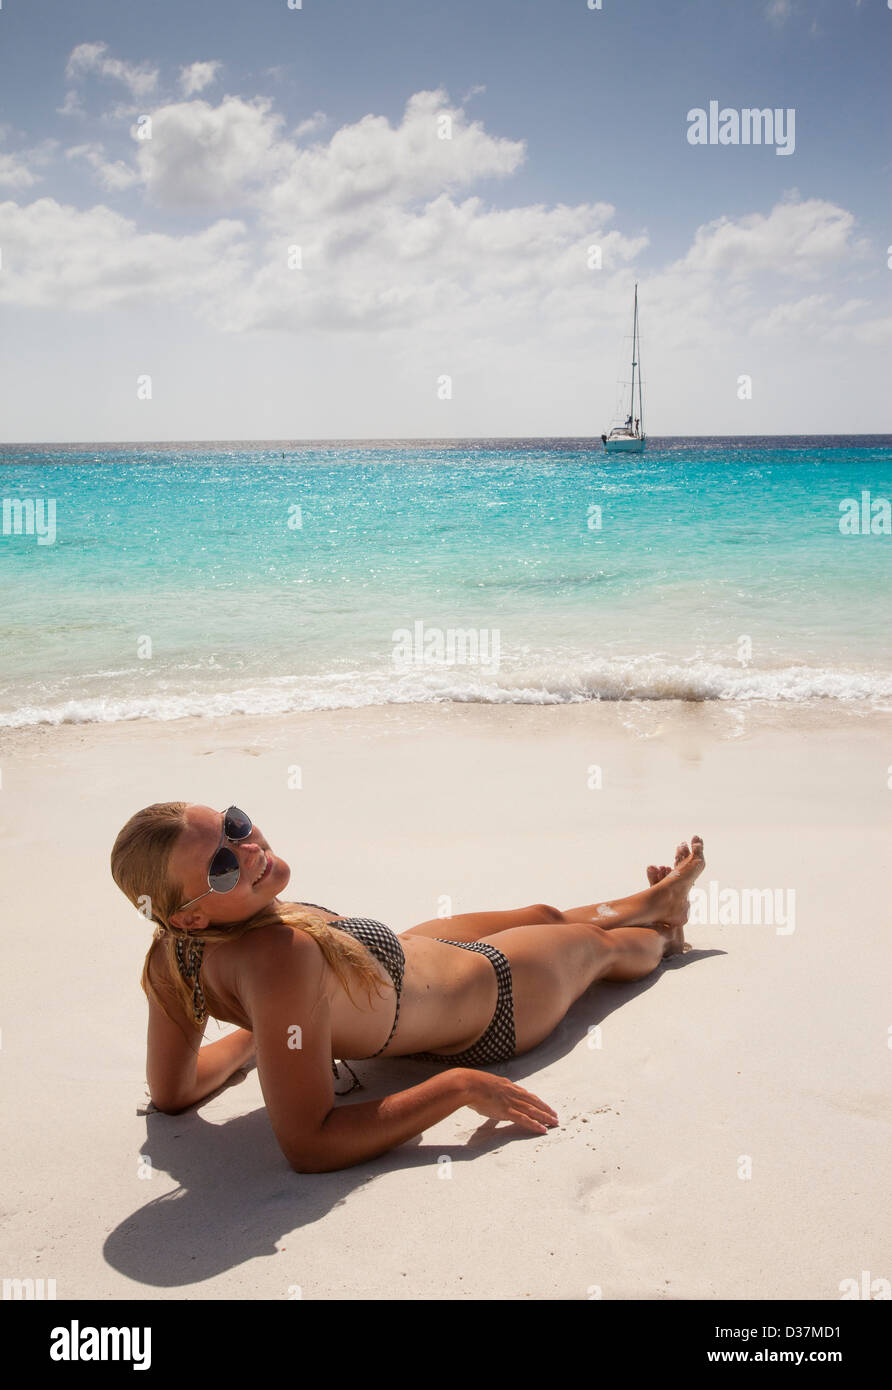 Smiling woman sunbathing on beach Banque D'Images